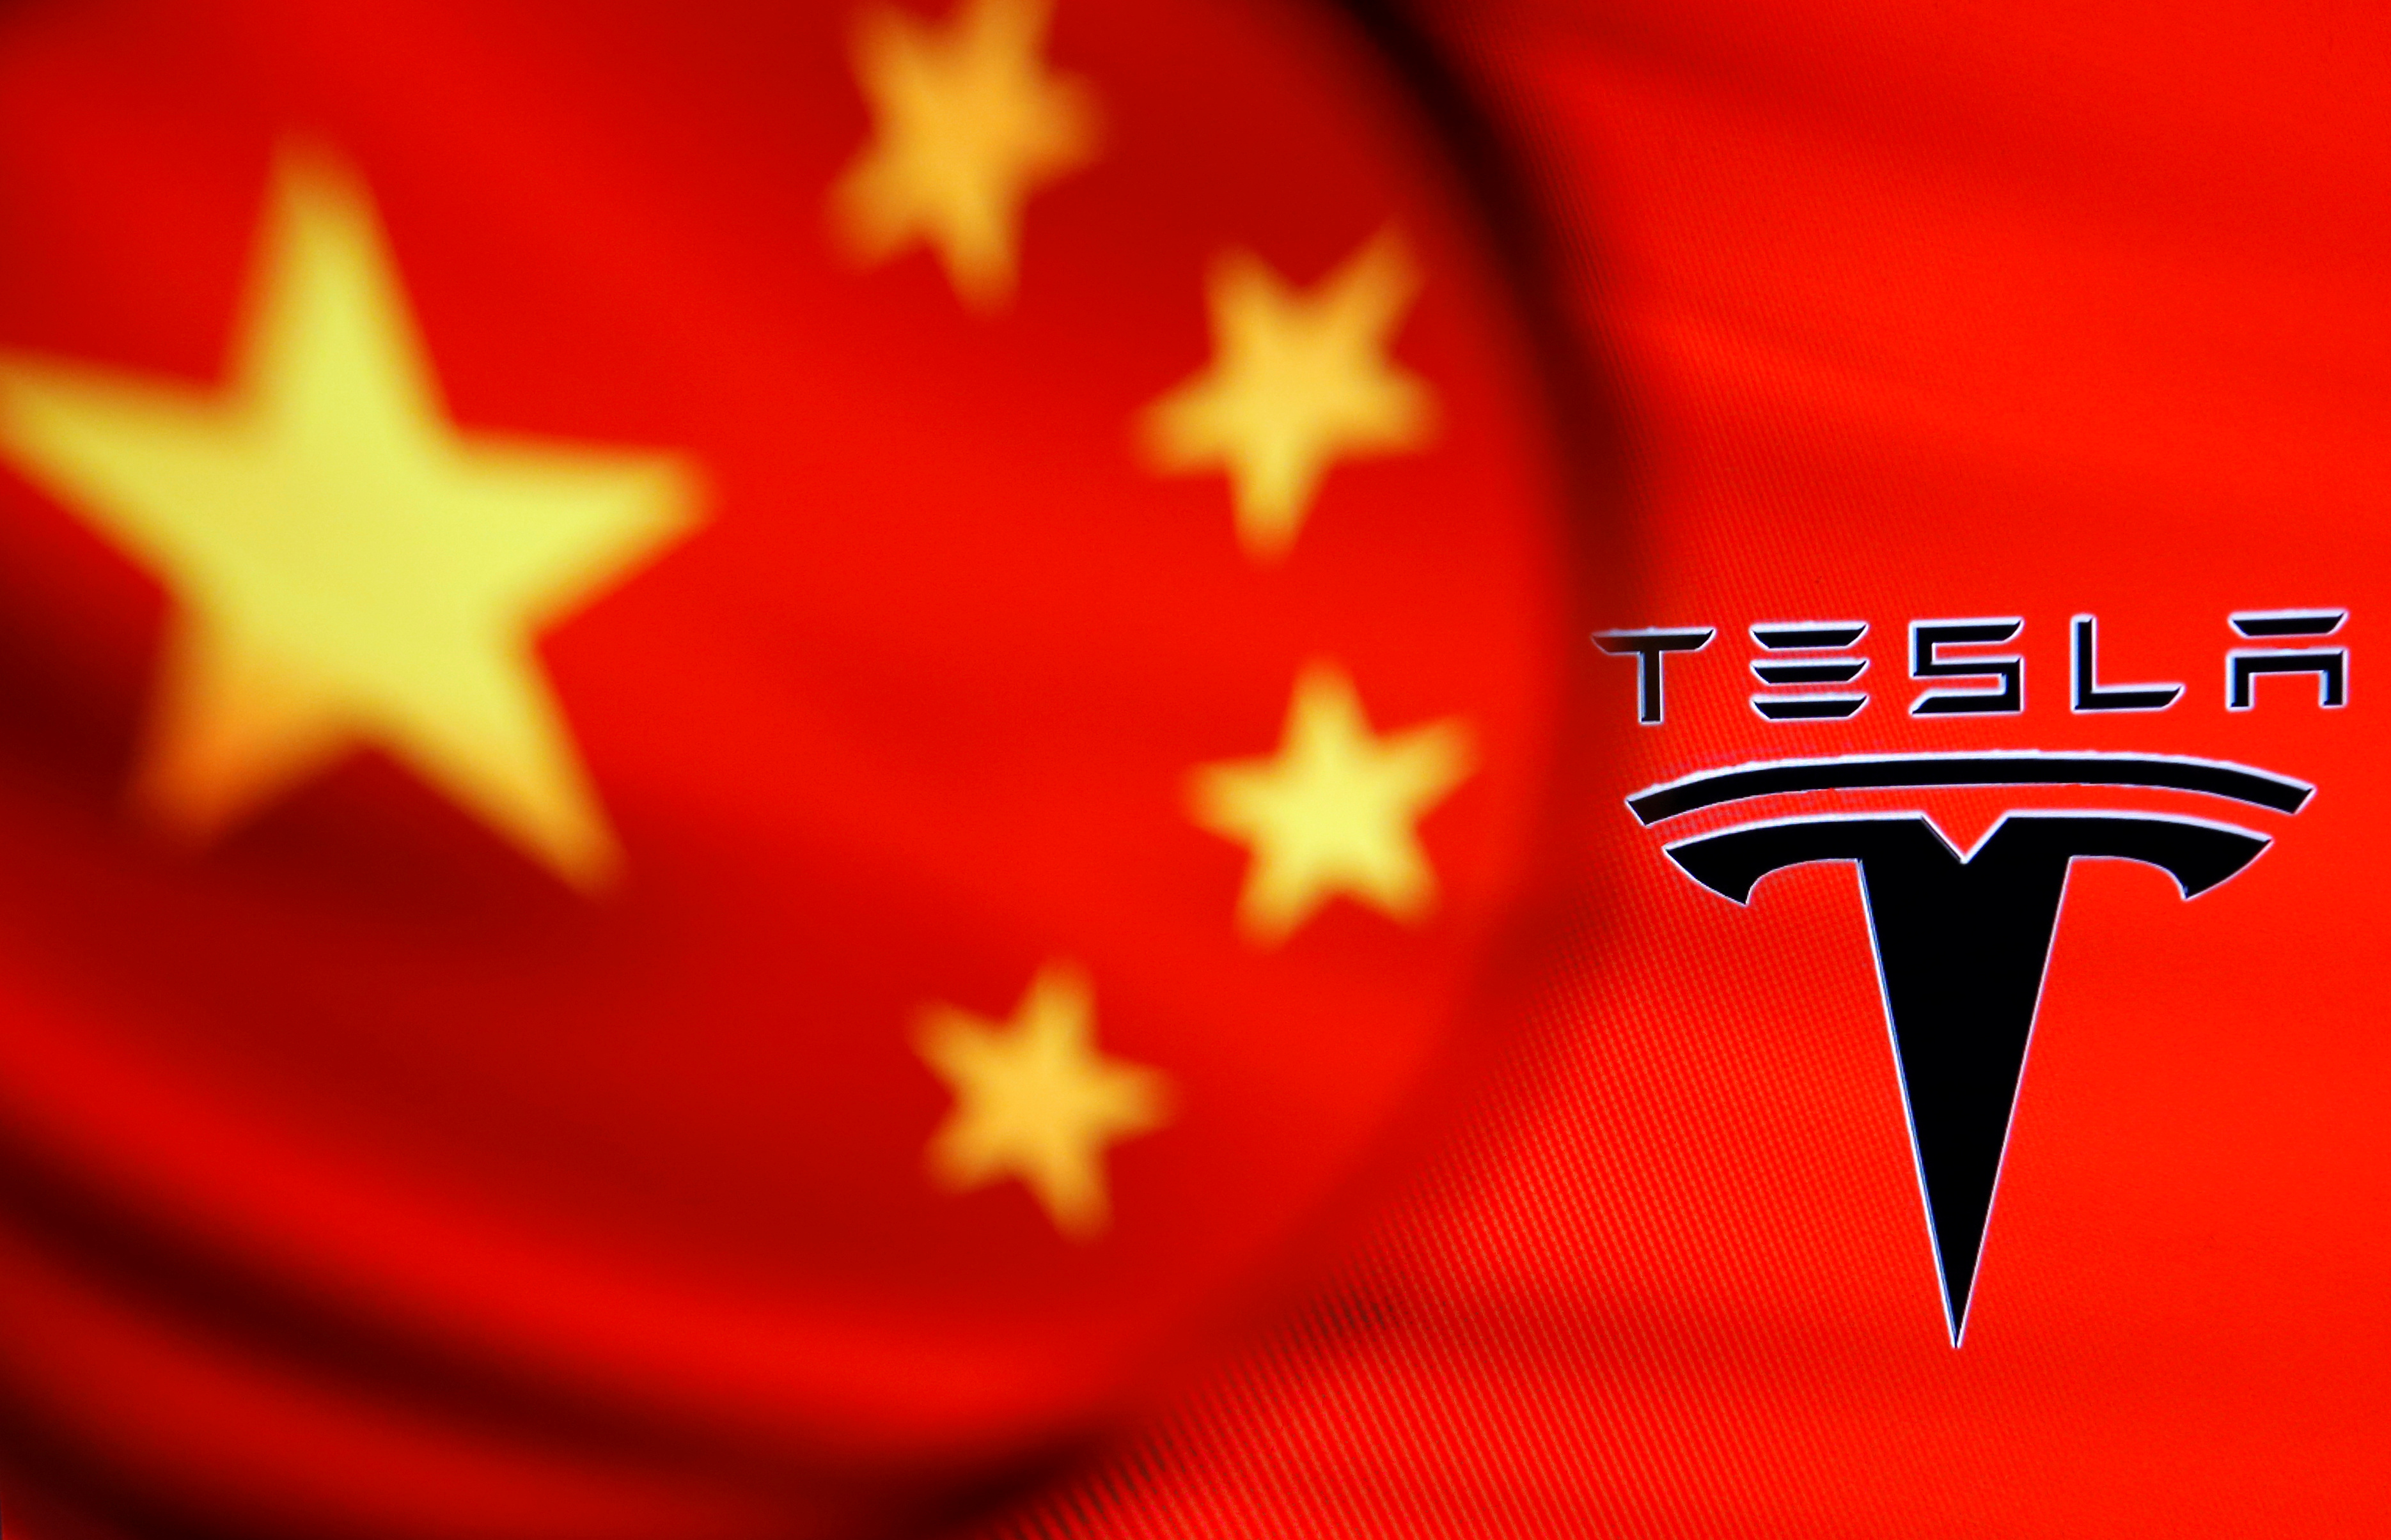 Chinese flag and Tesla logo is seen through a magnifier in this illustration